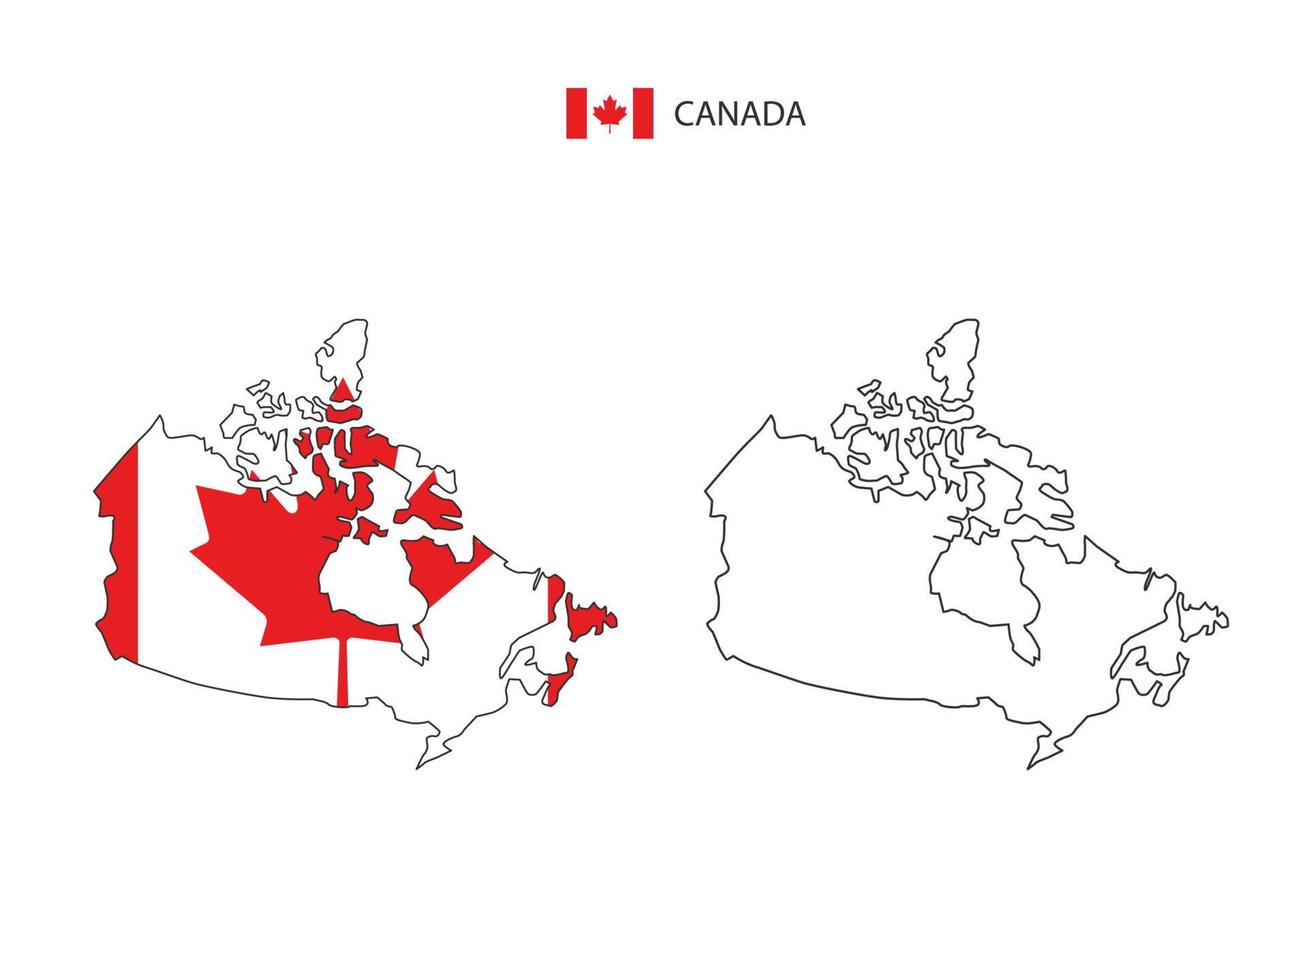 Canada map city vector divided by outline simplicity style. Have 2 versions, black thin line version and color of country flag version. Both map were on the white background.